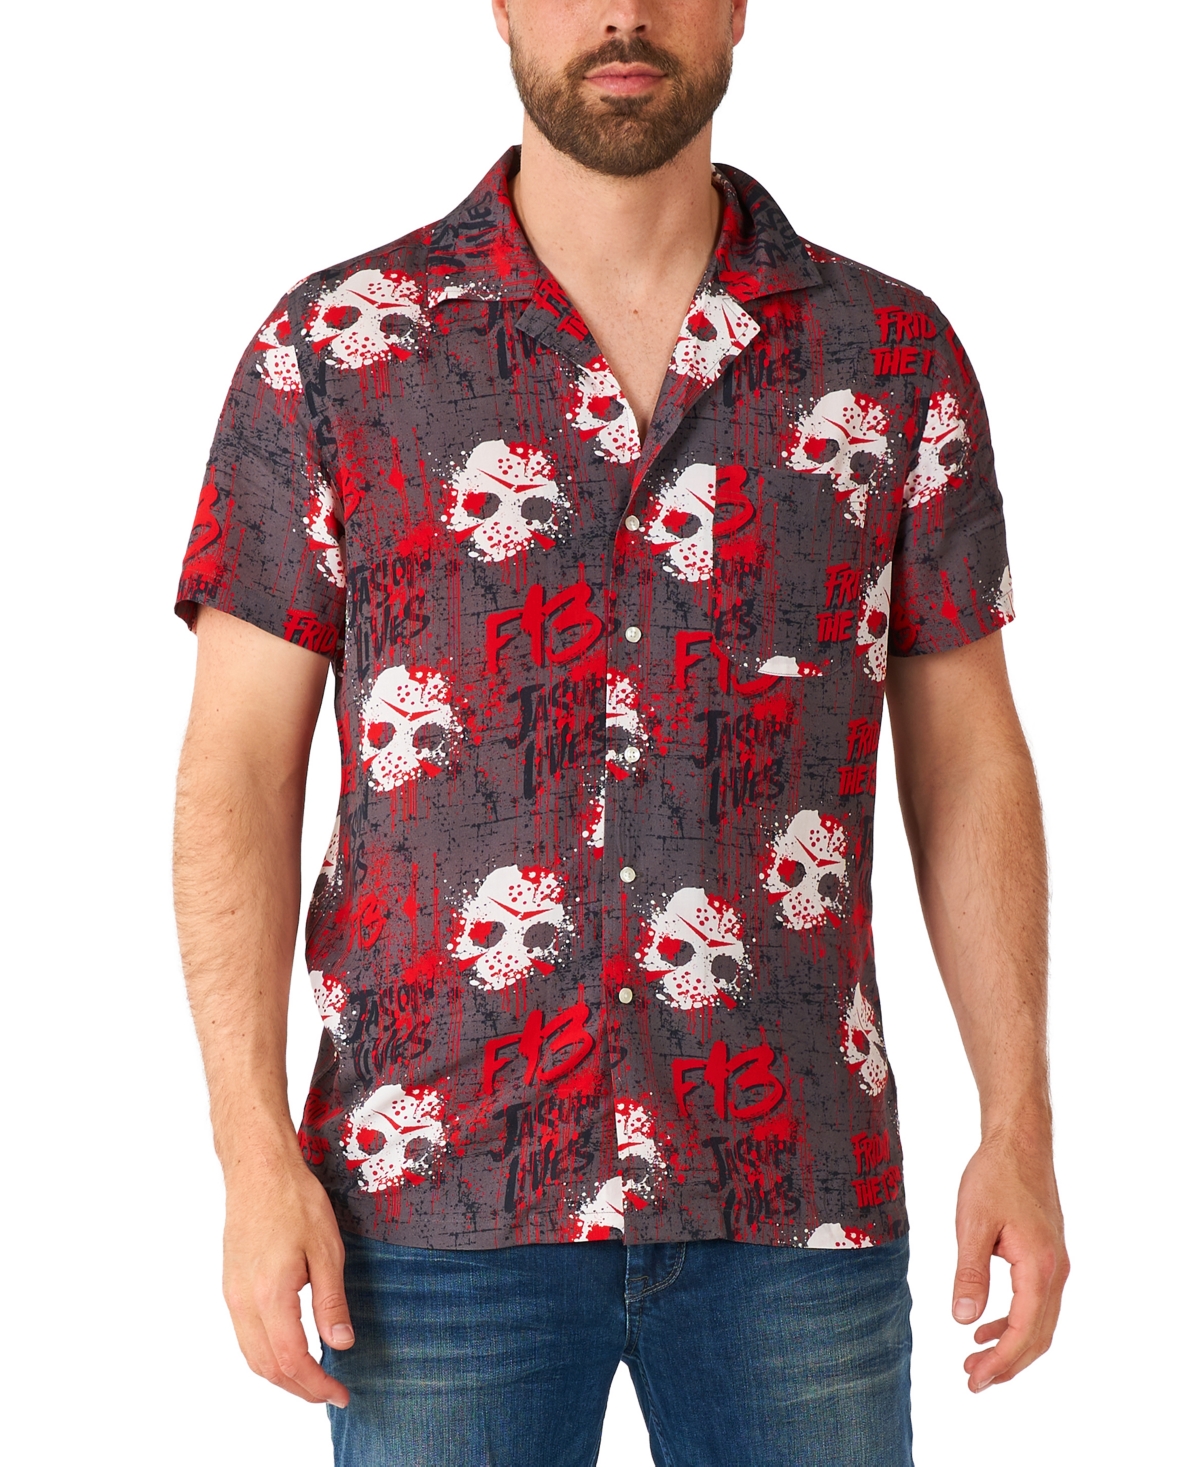 Men's Friday the 13th Graphic Shirt - Black